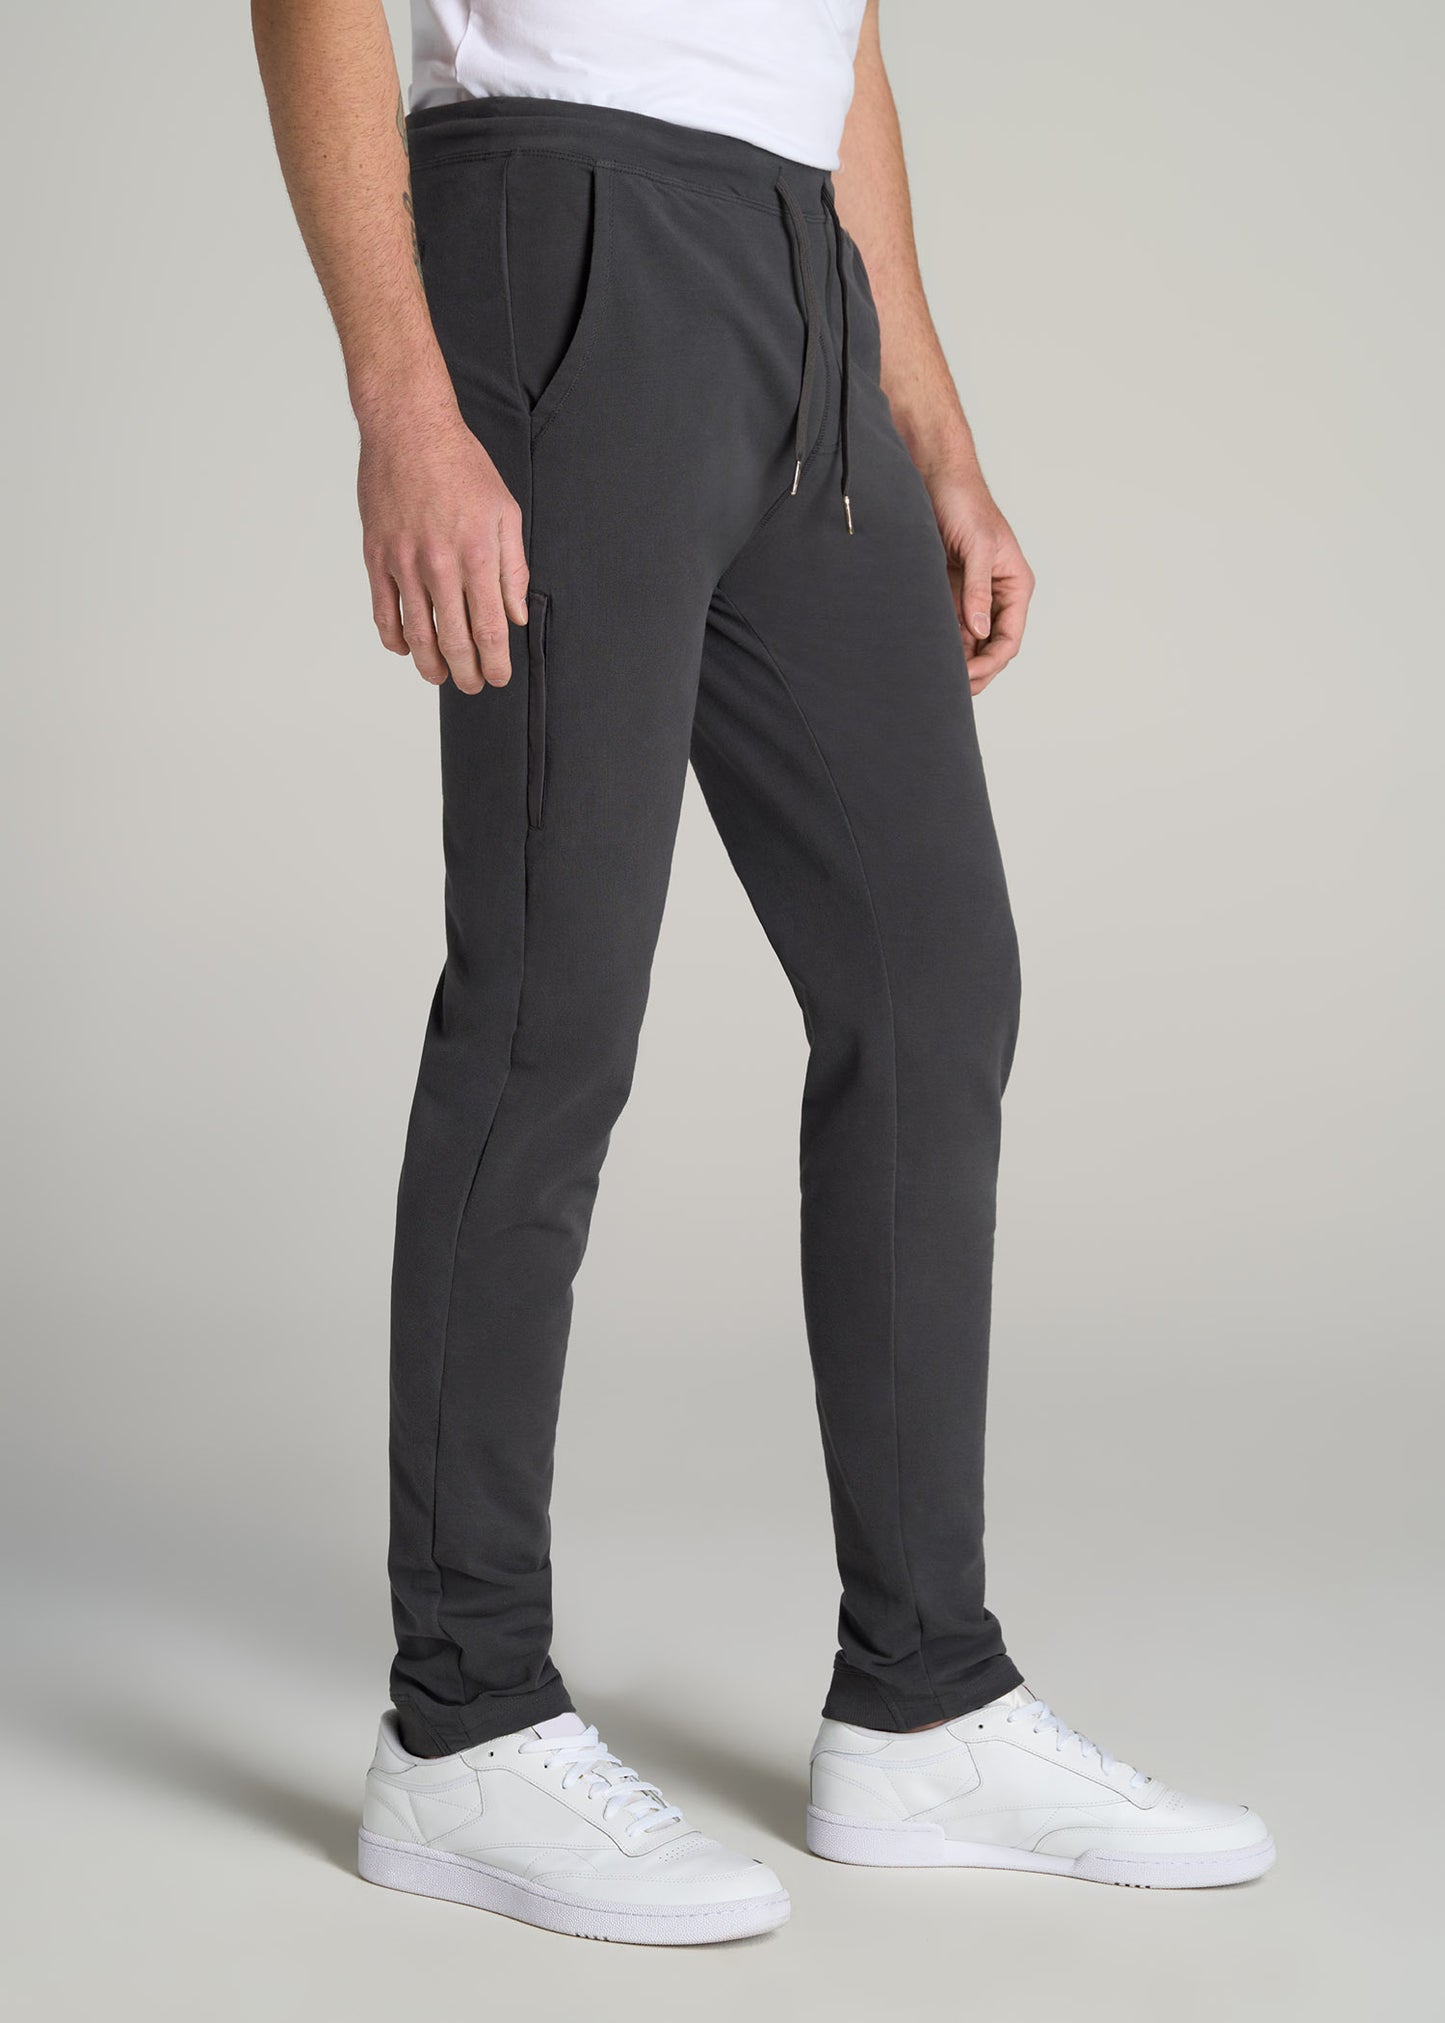     American-Tall-Men-Microsanded-French-Terry-Sweatpant-Iron-Grey-side